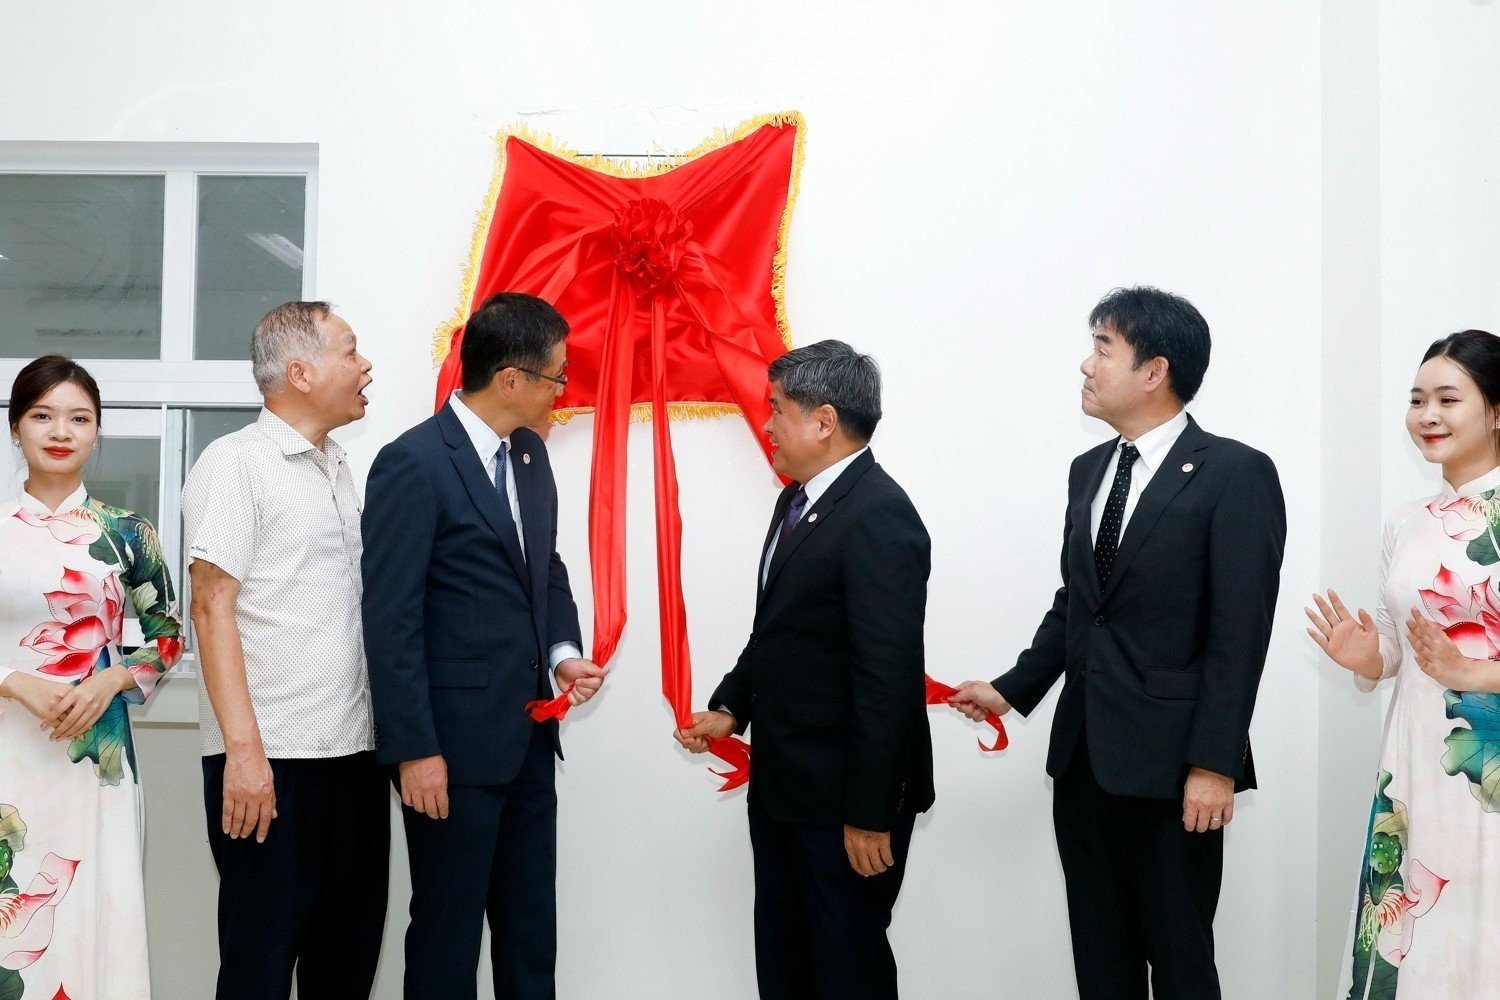 Deputy Minister Tran Thanh Nam and delegates cut the ribbon to open the testing laboratory funded by the Japanese Government for the Center for Testing, Verifying and Consulting Quality of Agriculture, Forestry and Fisheries - now the Reference Testing and Agrifood Quality Consultancy (RETAQ).